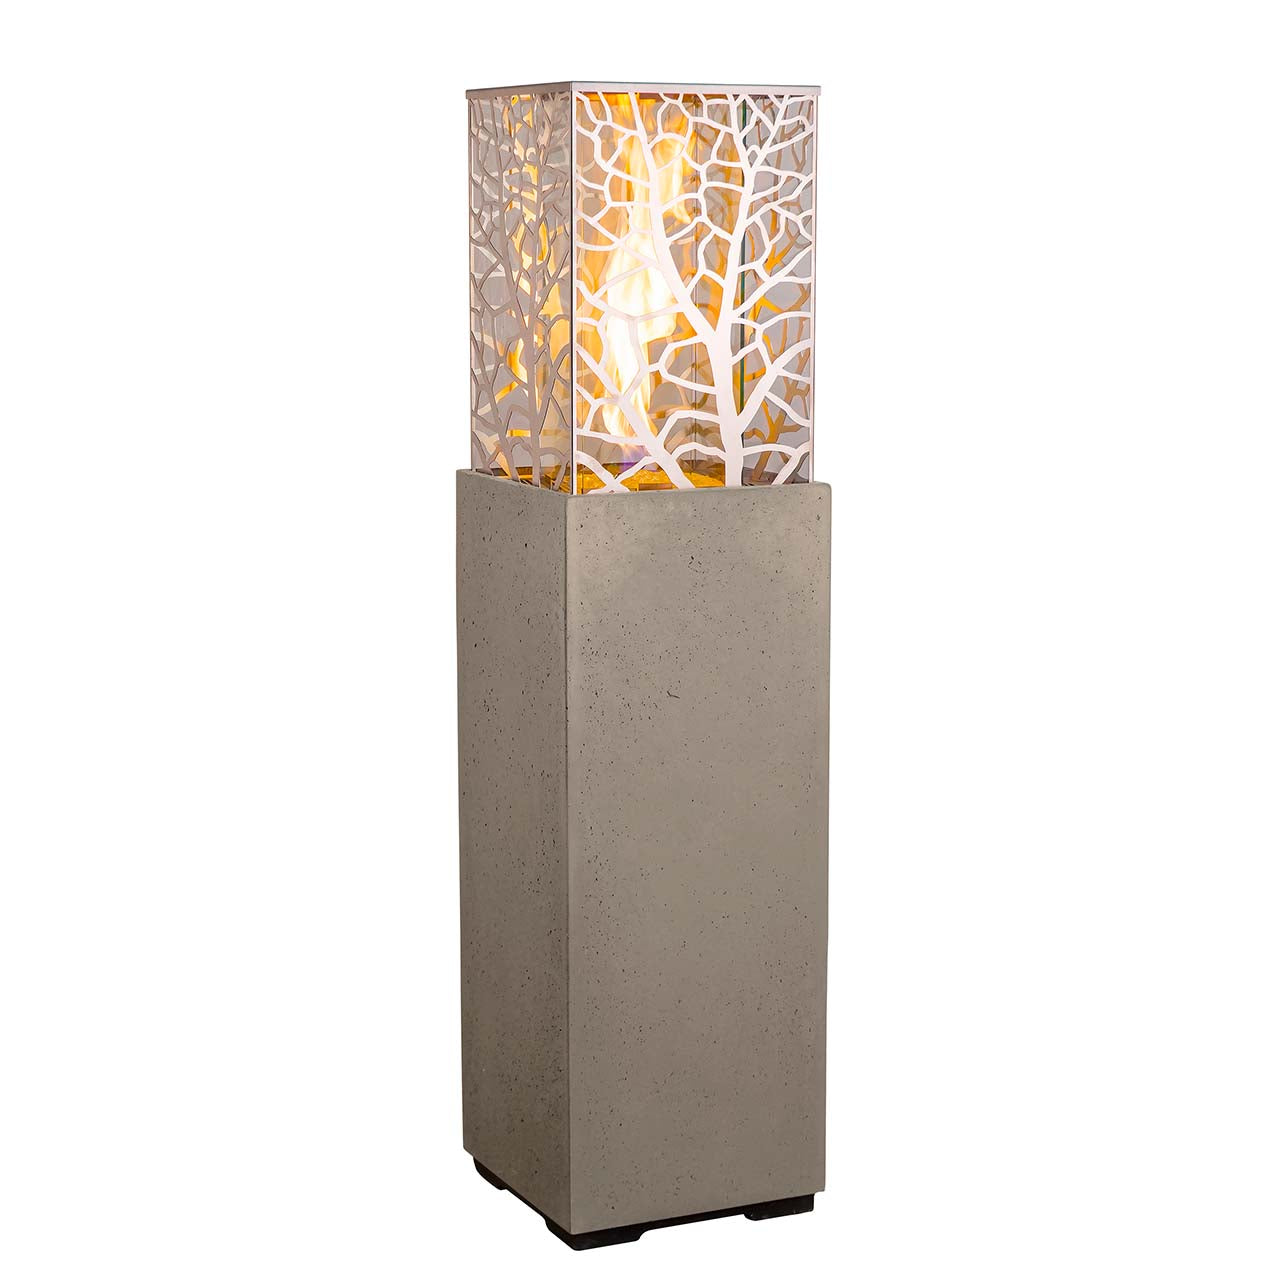 American Fyre Designs Magnolia Lantern with Electronic Ignition + Free Cover